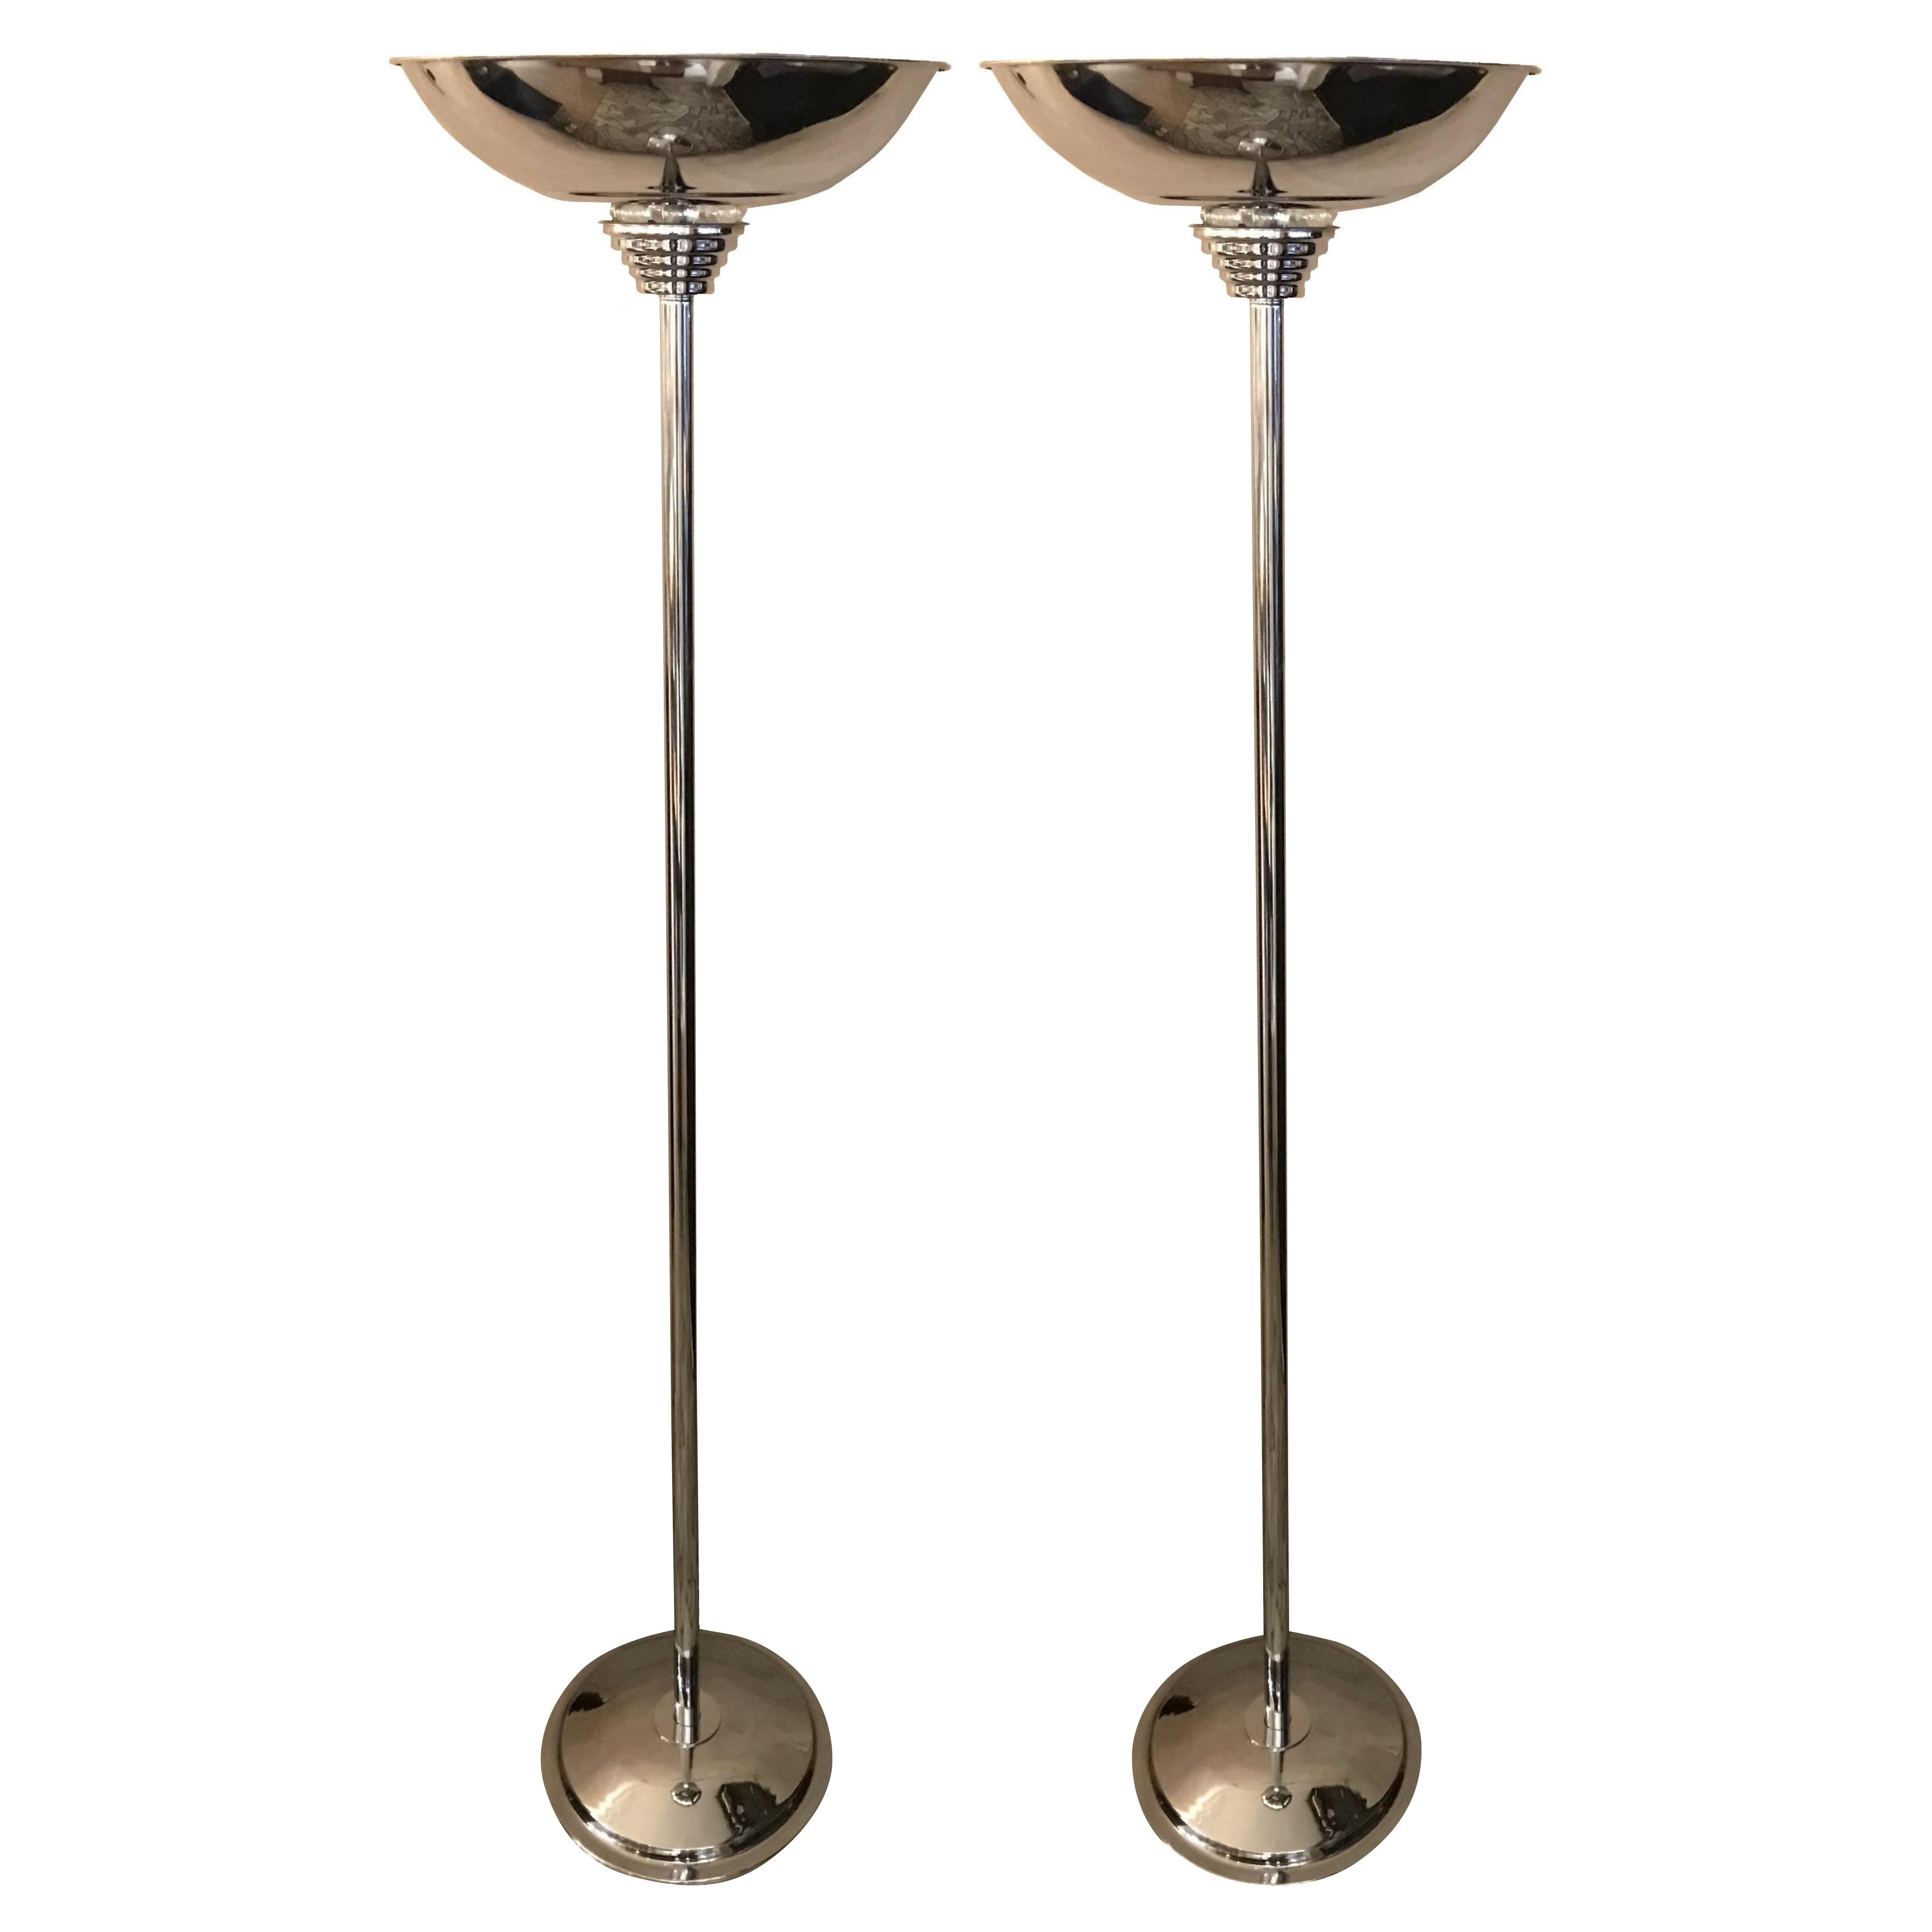 Pair of Art Deco Floor Lamp Staggere, France, Materials: Glass and Chrome, 1930